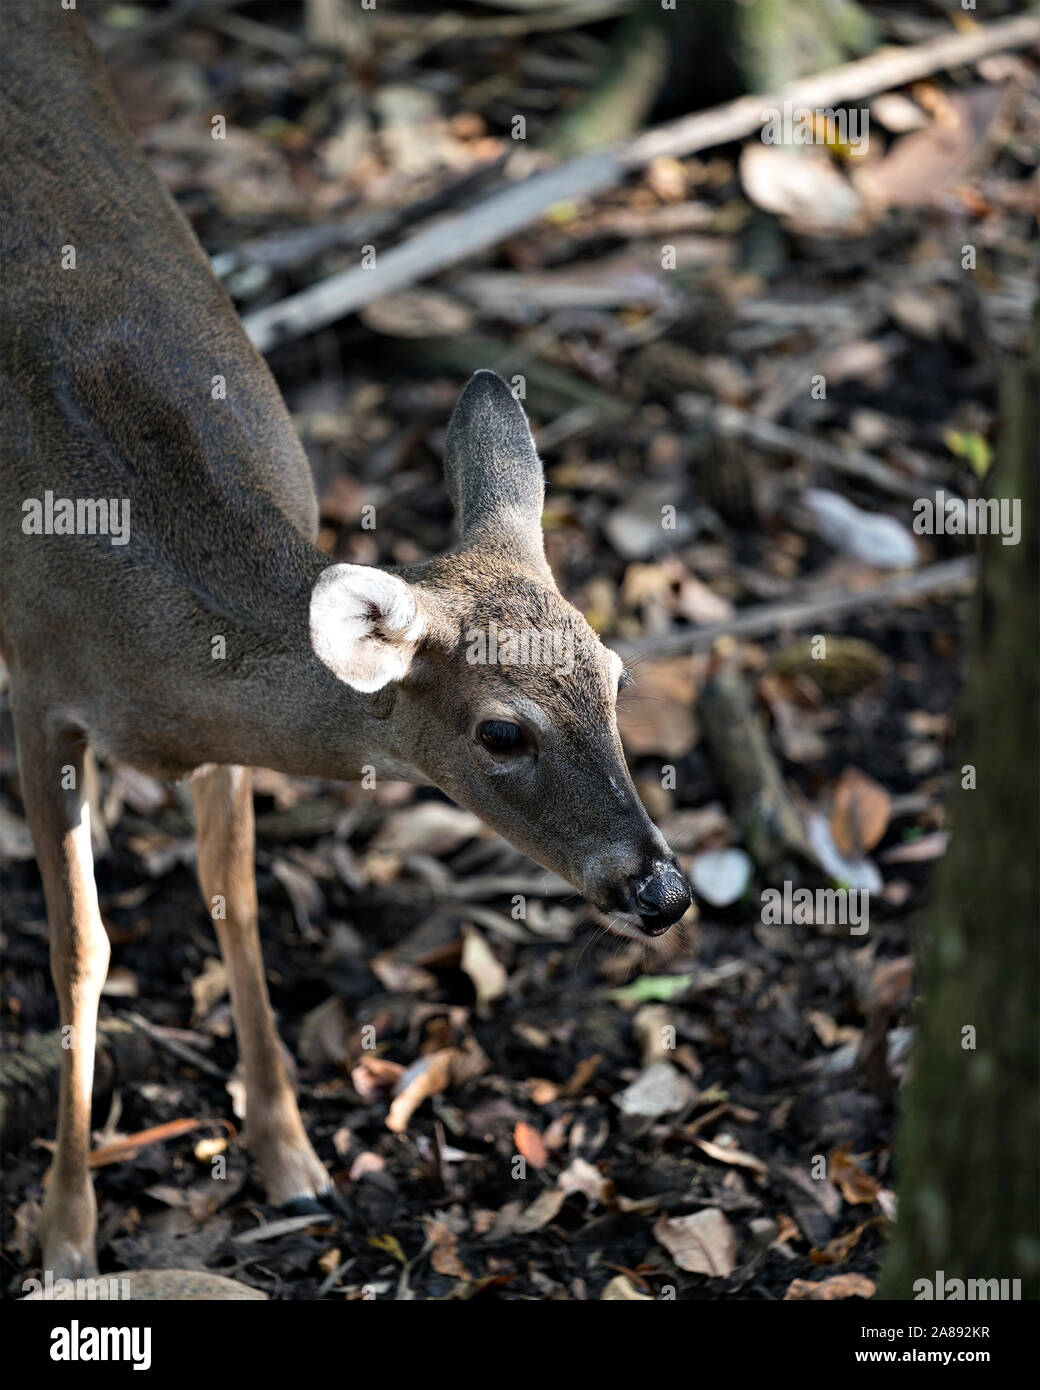 Deer (White-tailed deer) close-up view walking in the field exposing its  head, ears, eyes, nose, legs, in its environment and surrounding. Stock Photo